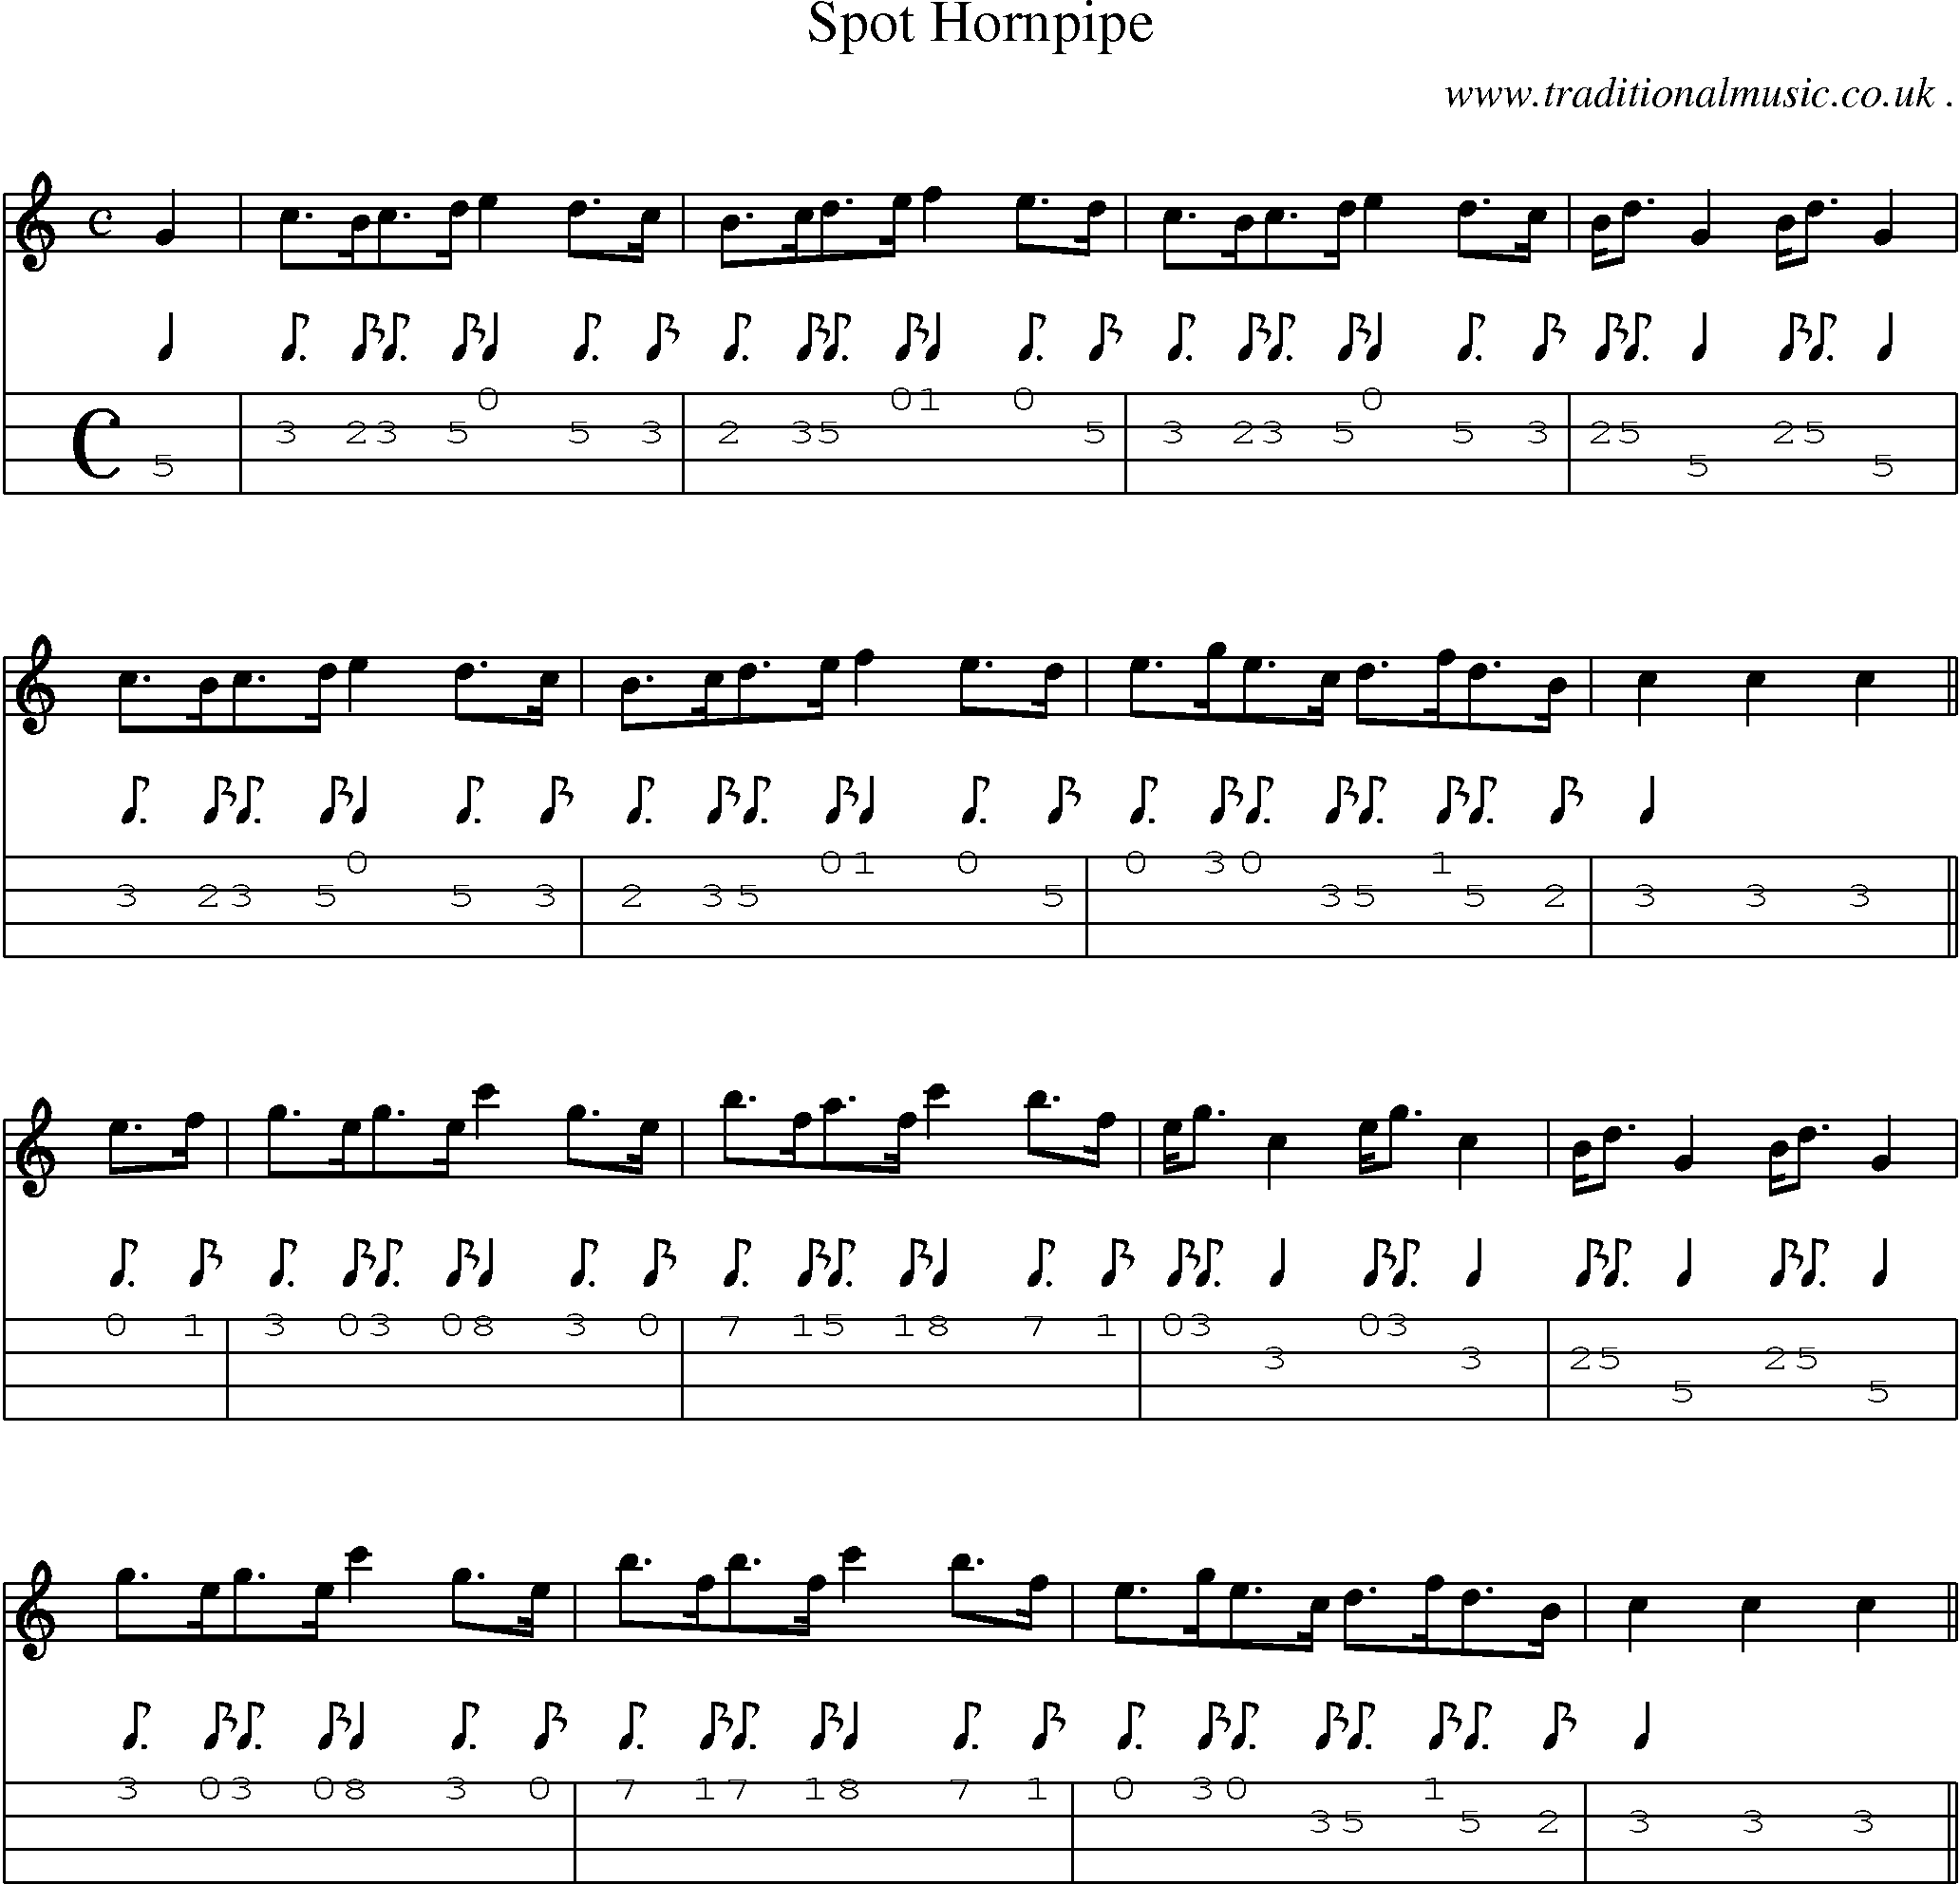 Sheet-Music and Mandolin Tabs for Spot Hornpipe